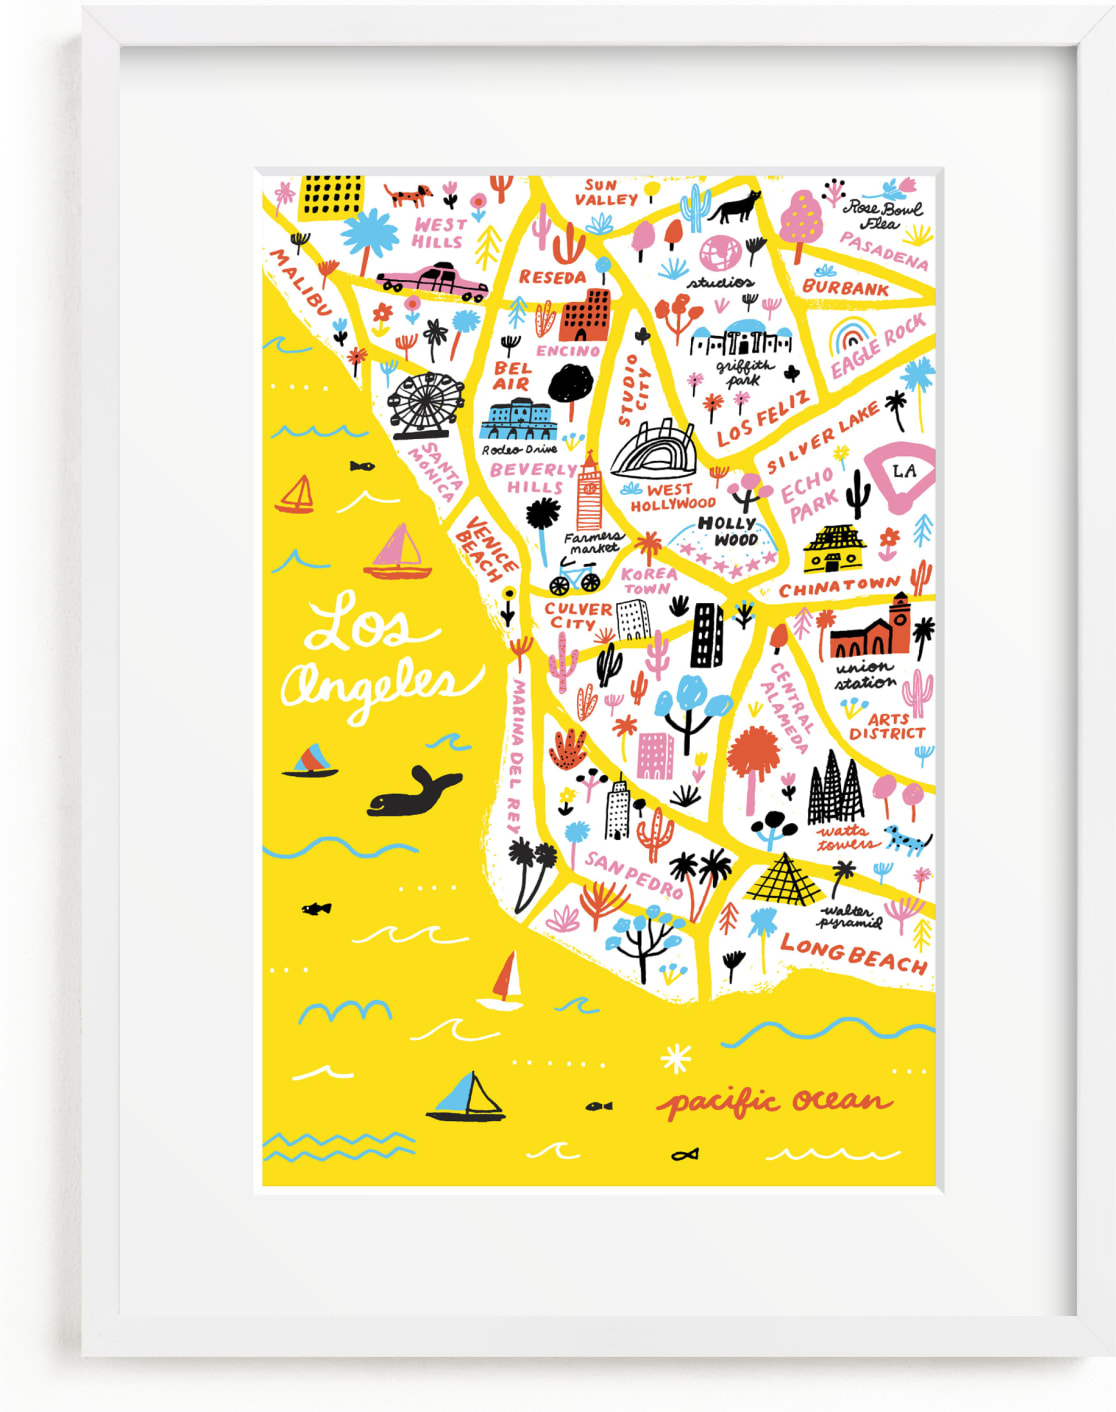 This is a colorful art by Jordan Sondler called I Love Los Angeles.